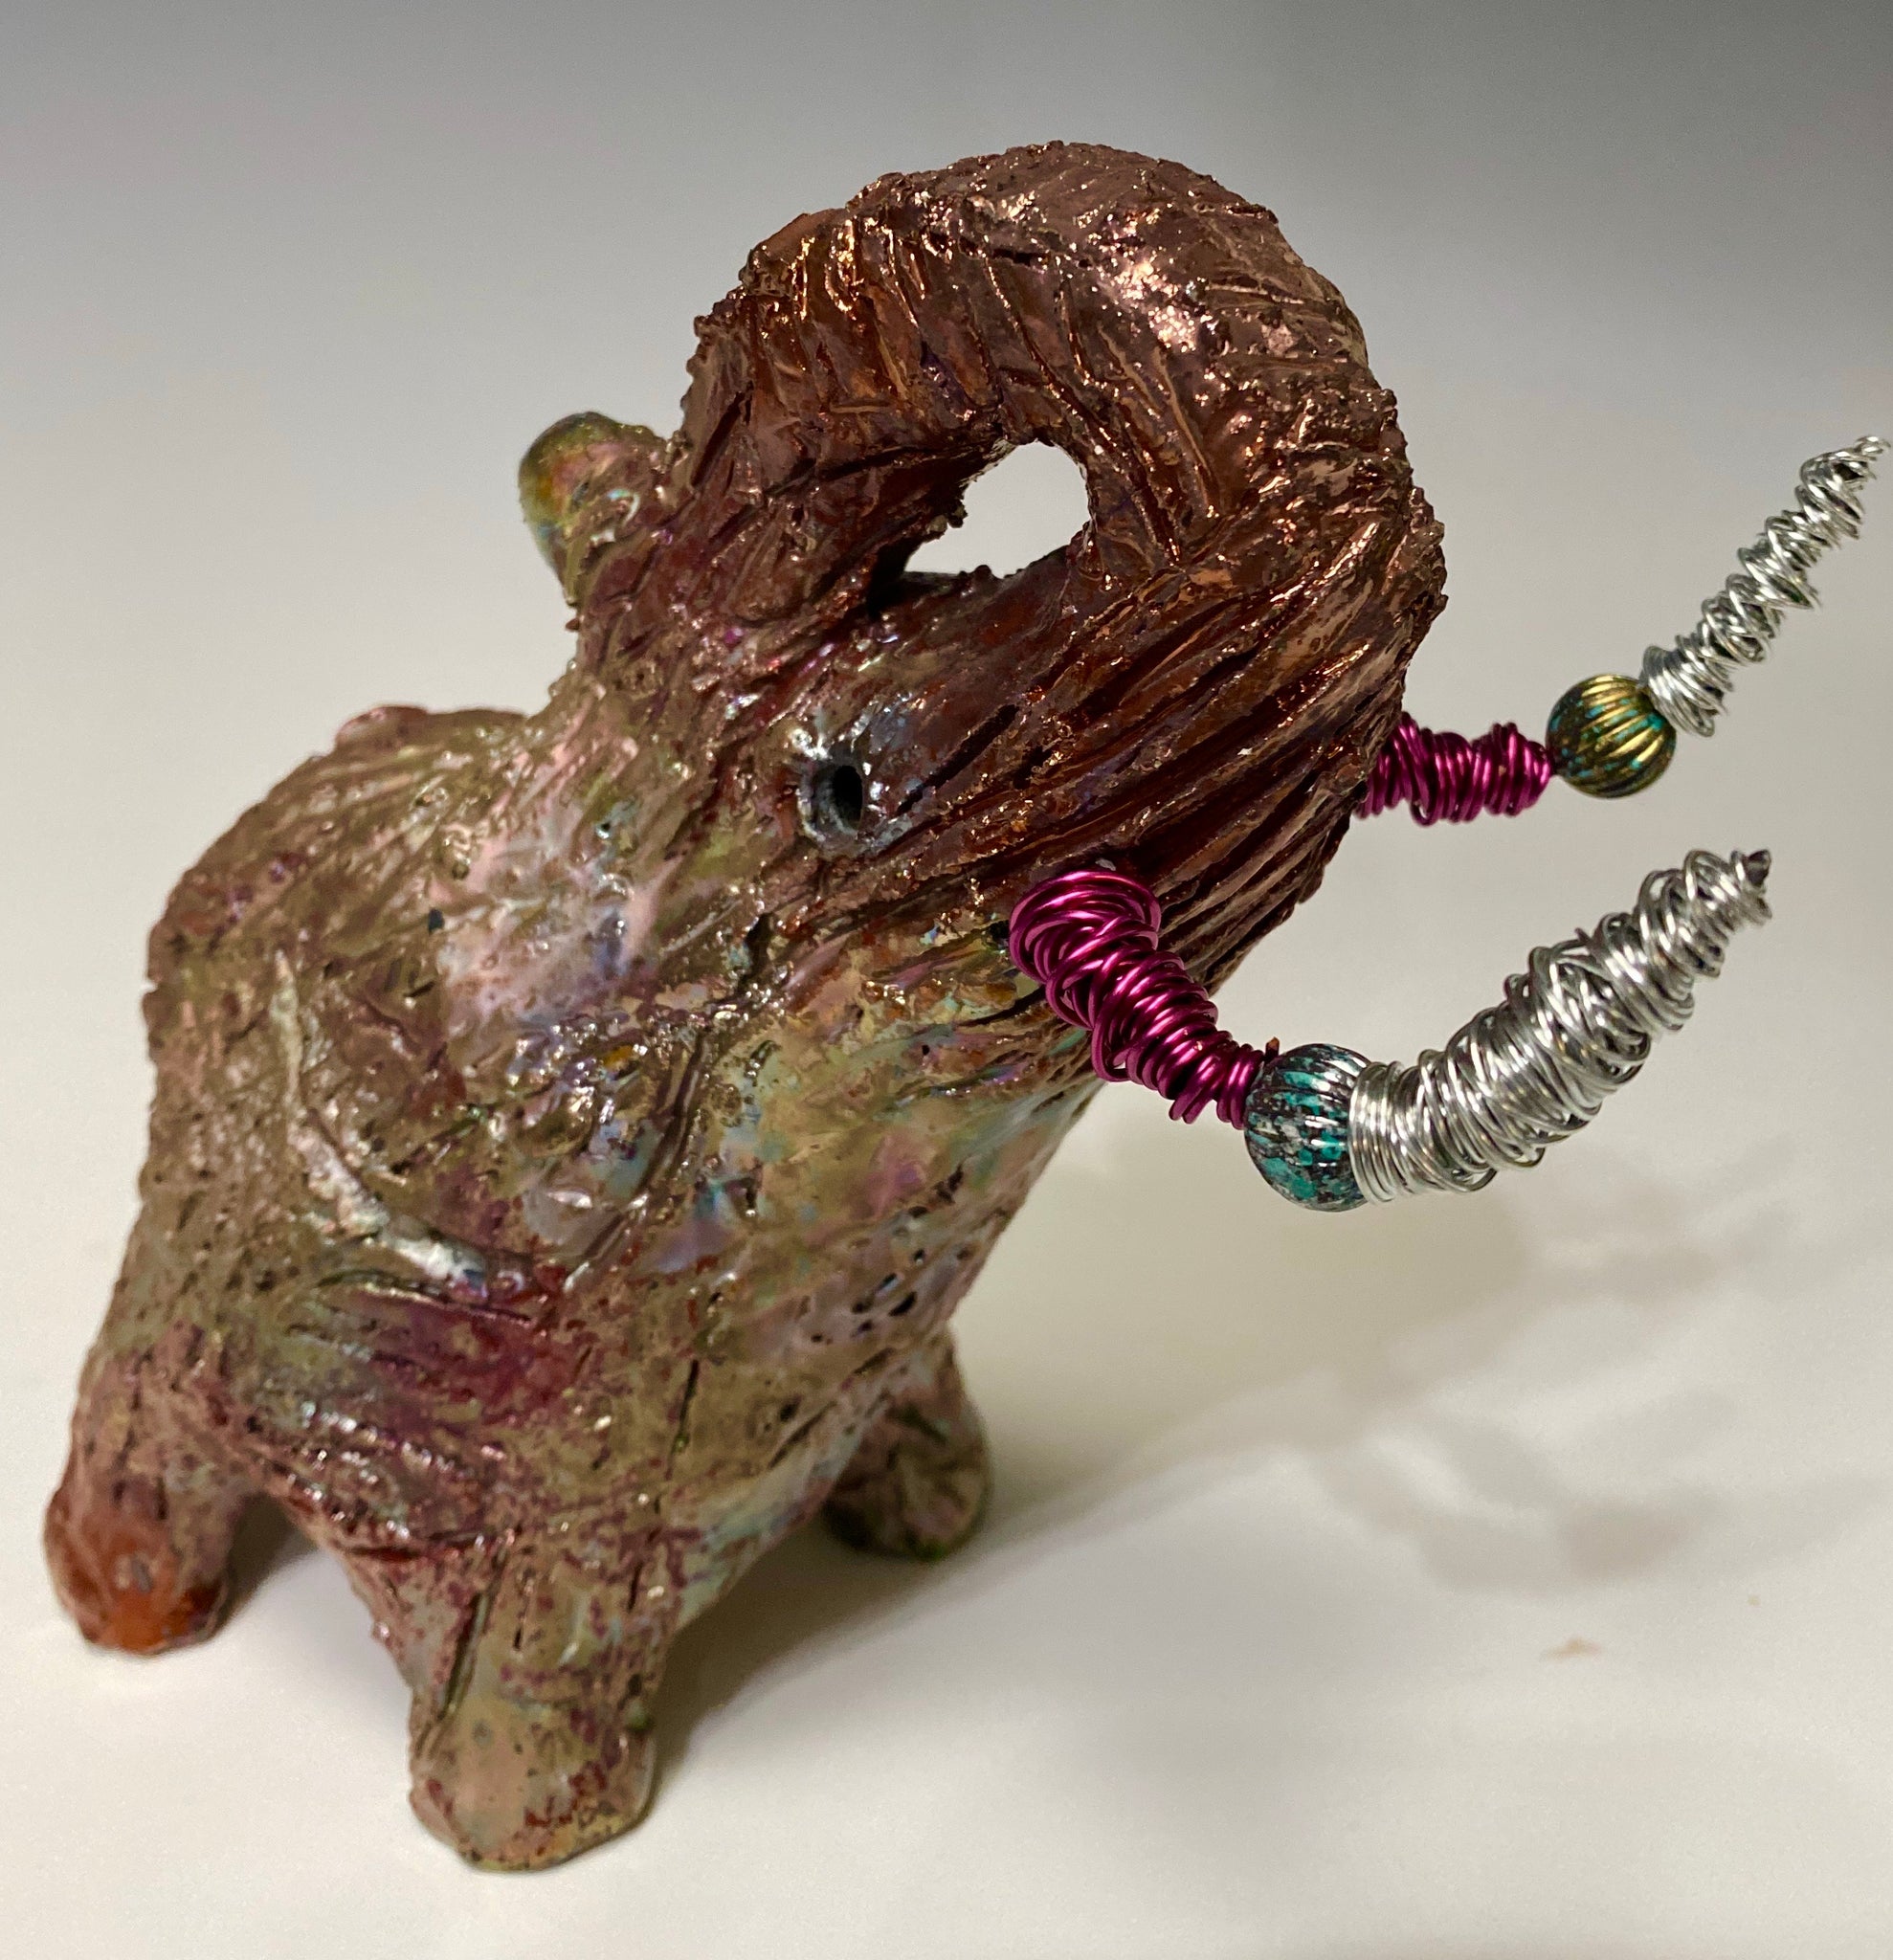 Have you HERD!!!!!!     Elephants are one of my favorite animals to create. They are so majestic"  Just one of these lovely Raku Fired Elephant will make an excellent gift for your  BFF,  or just for you .    This raku fired elephant stands 6" x 4" x 6" and weighs 1 lb. She has beaded tusks and a textured glossy gold and copper metallic body. This one is nice to add your Herdew Collection!